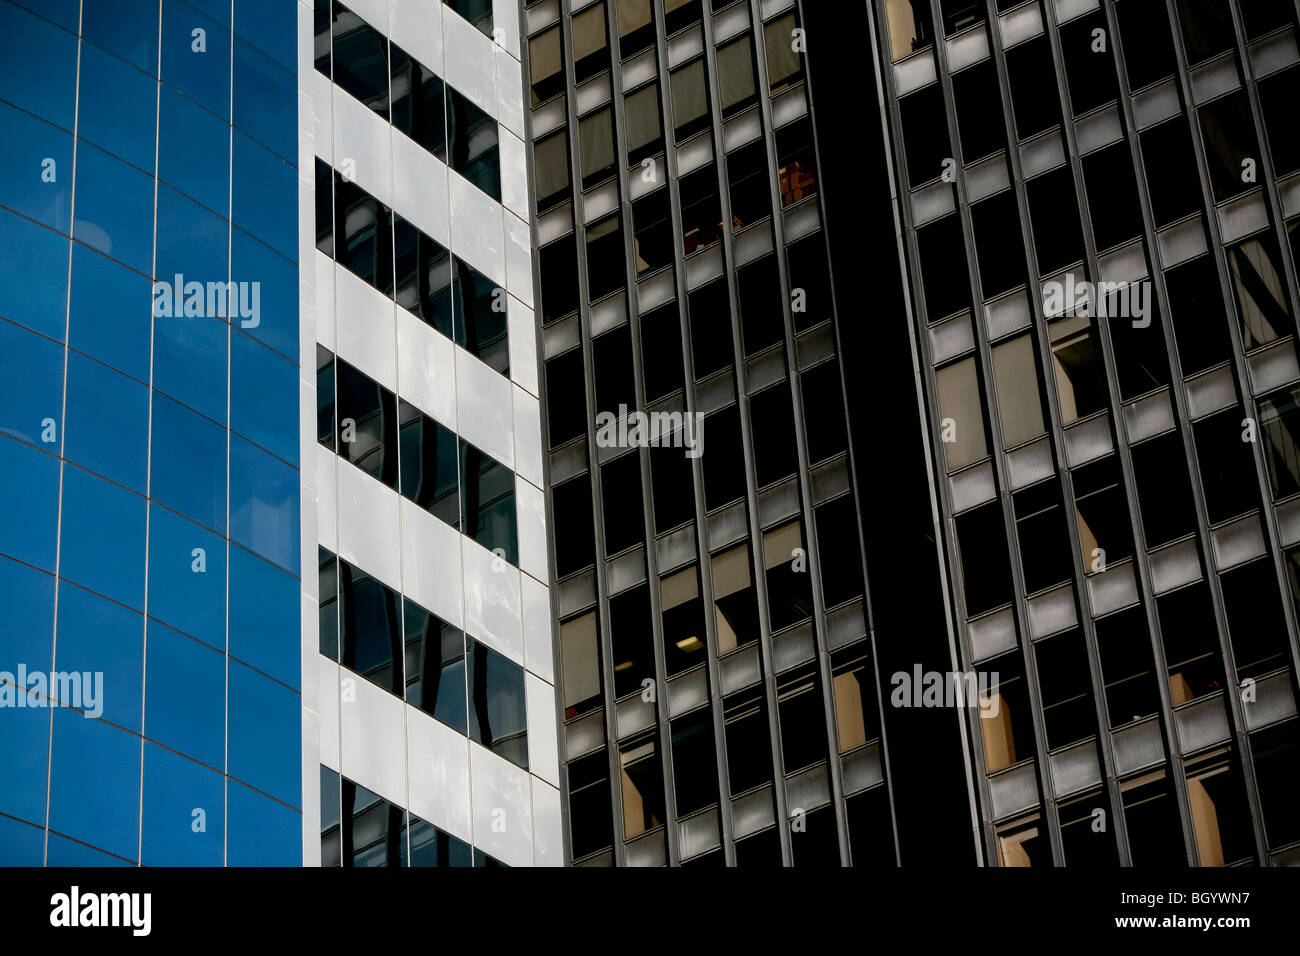 Downtown New York architecture and facade of old and modern buildings. Stock Photo